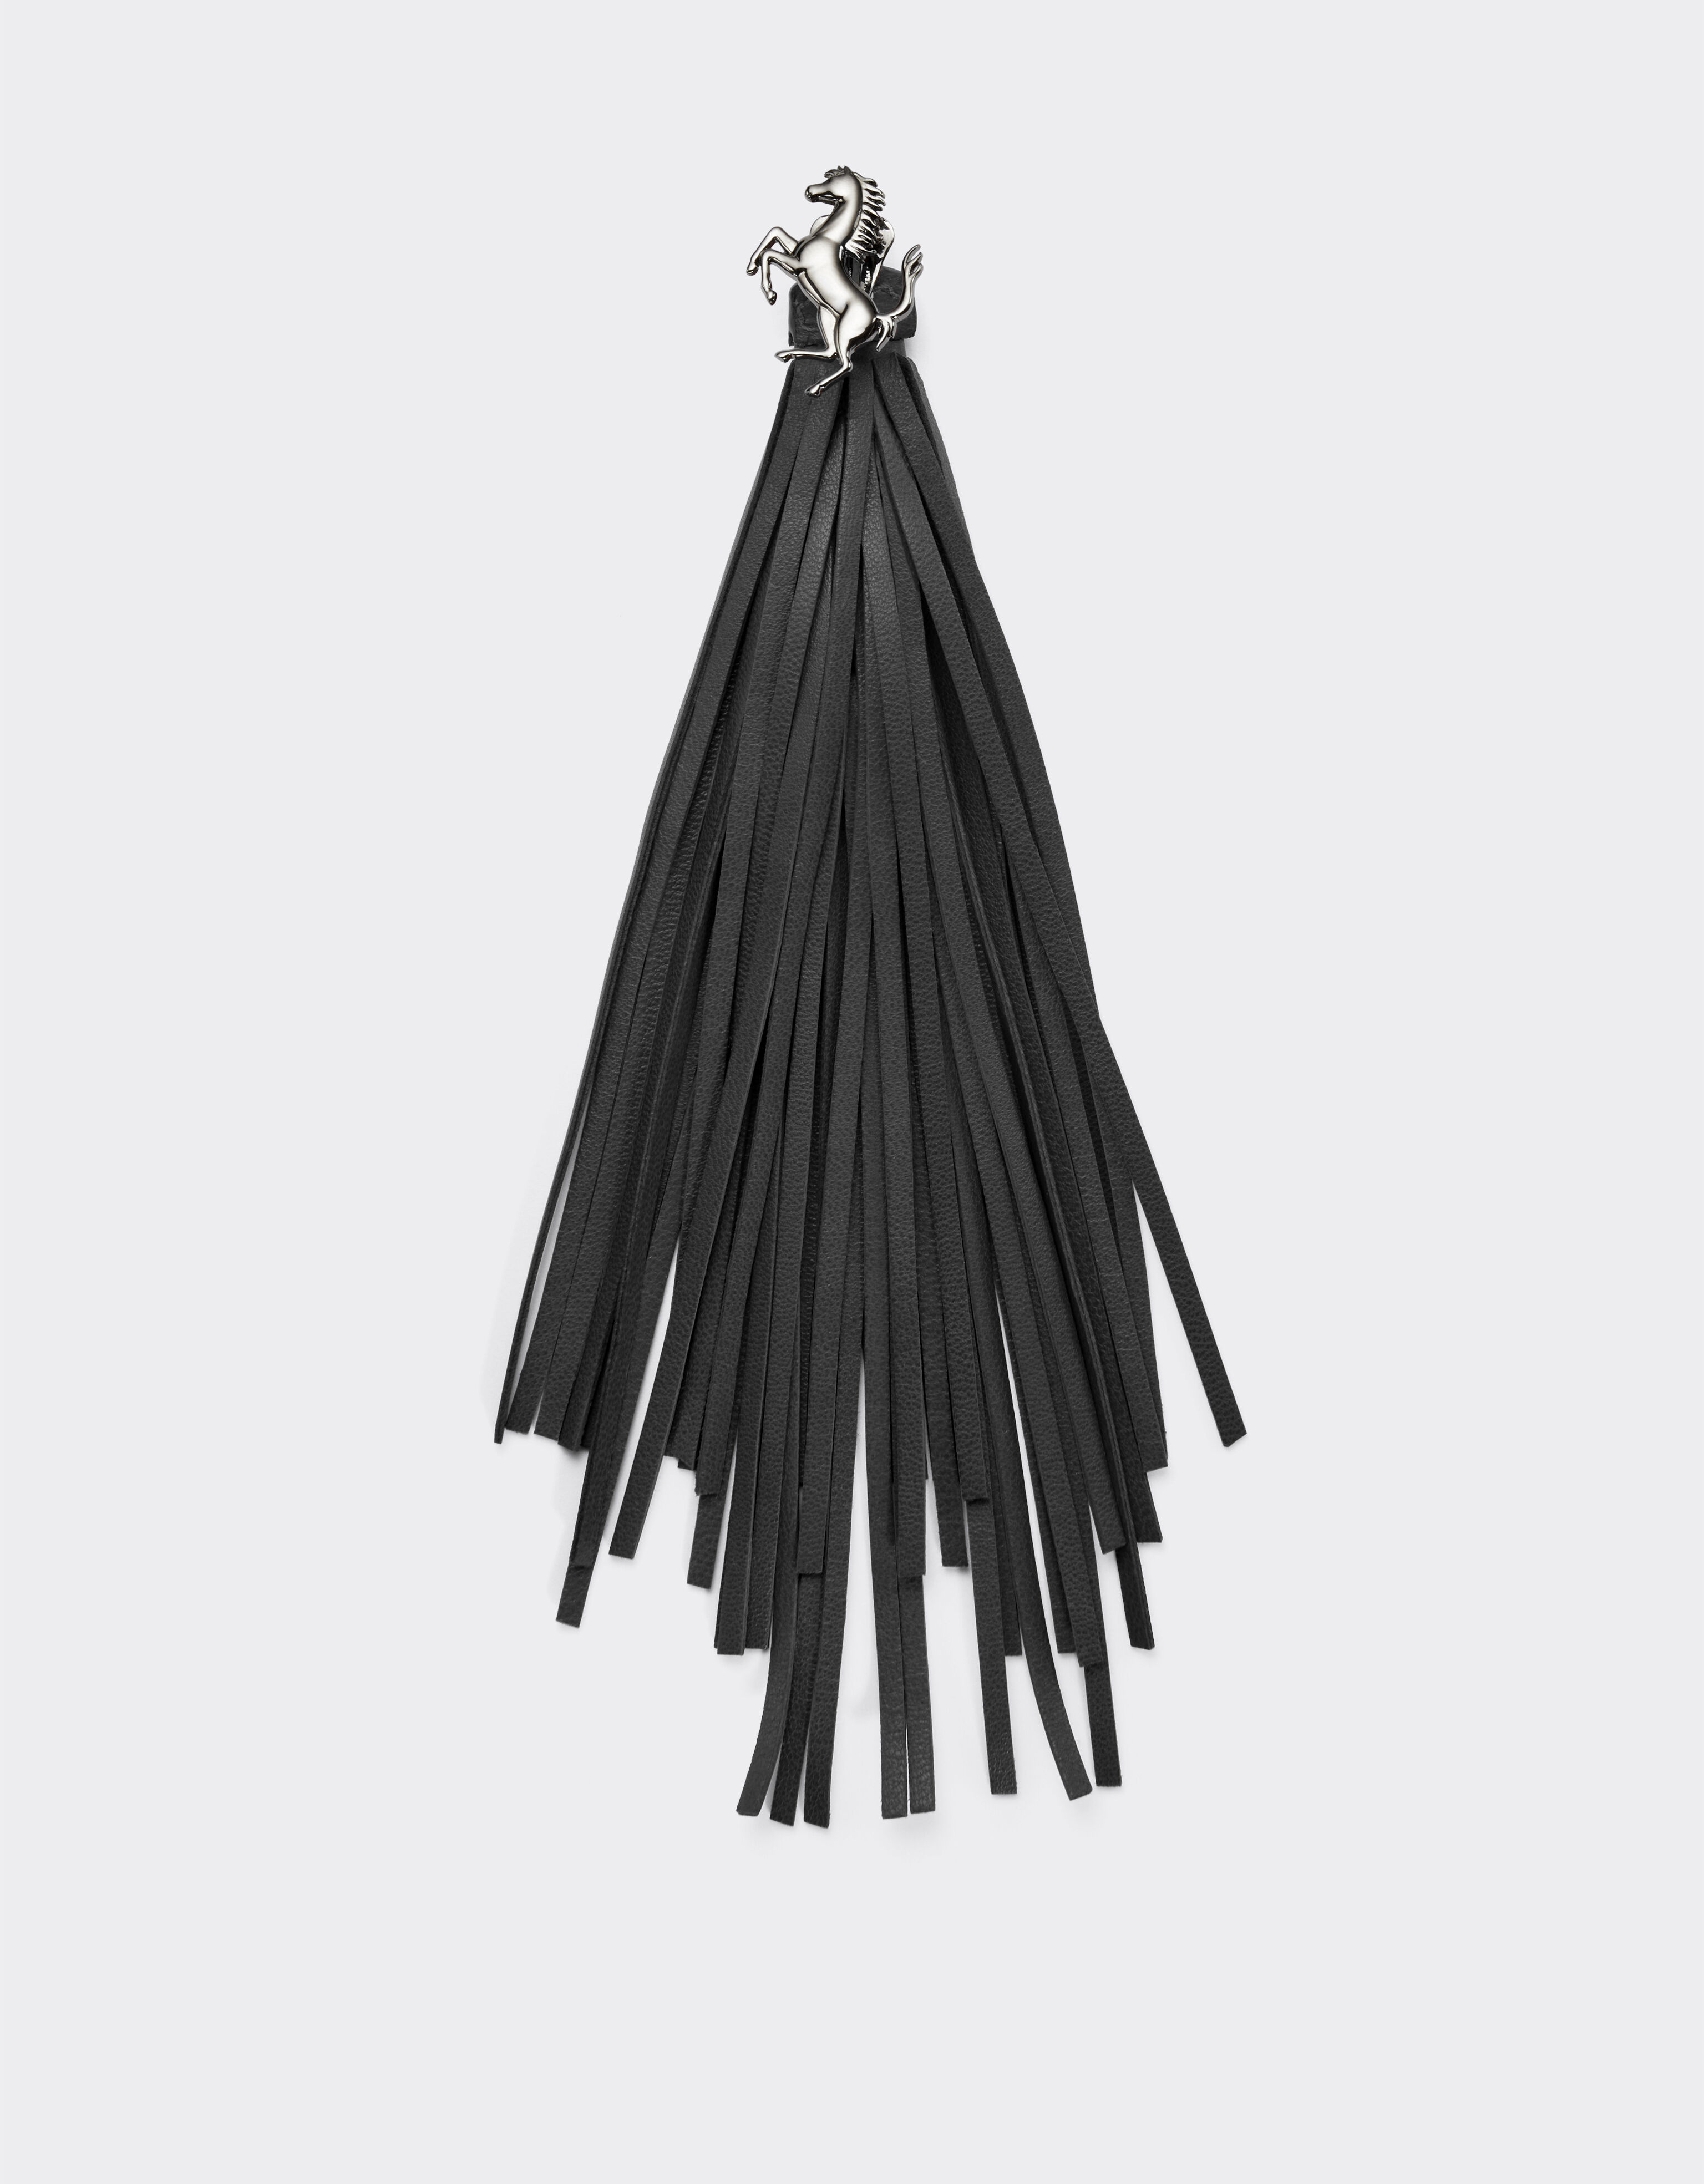 Ferrari Earrings with Prancing Horse detail and leather tassel Anthracite 20448f